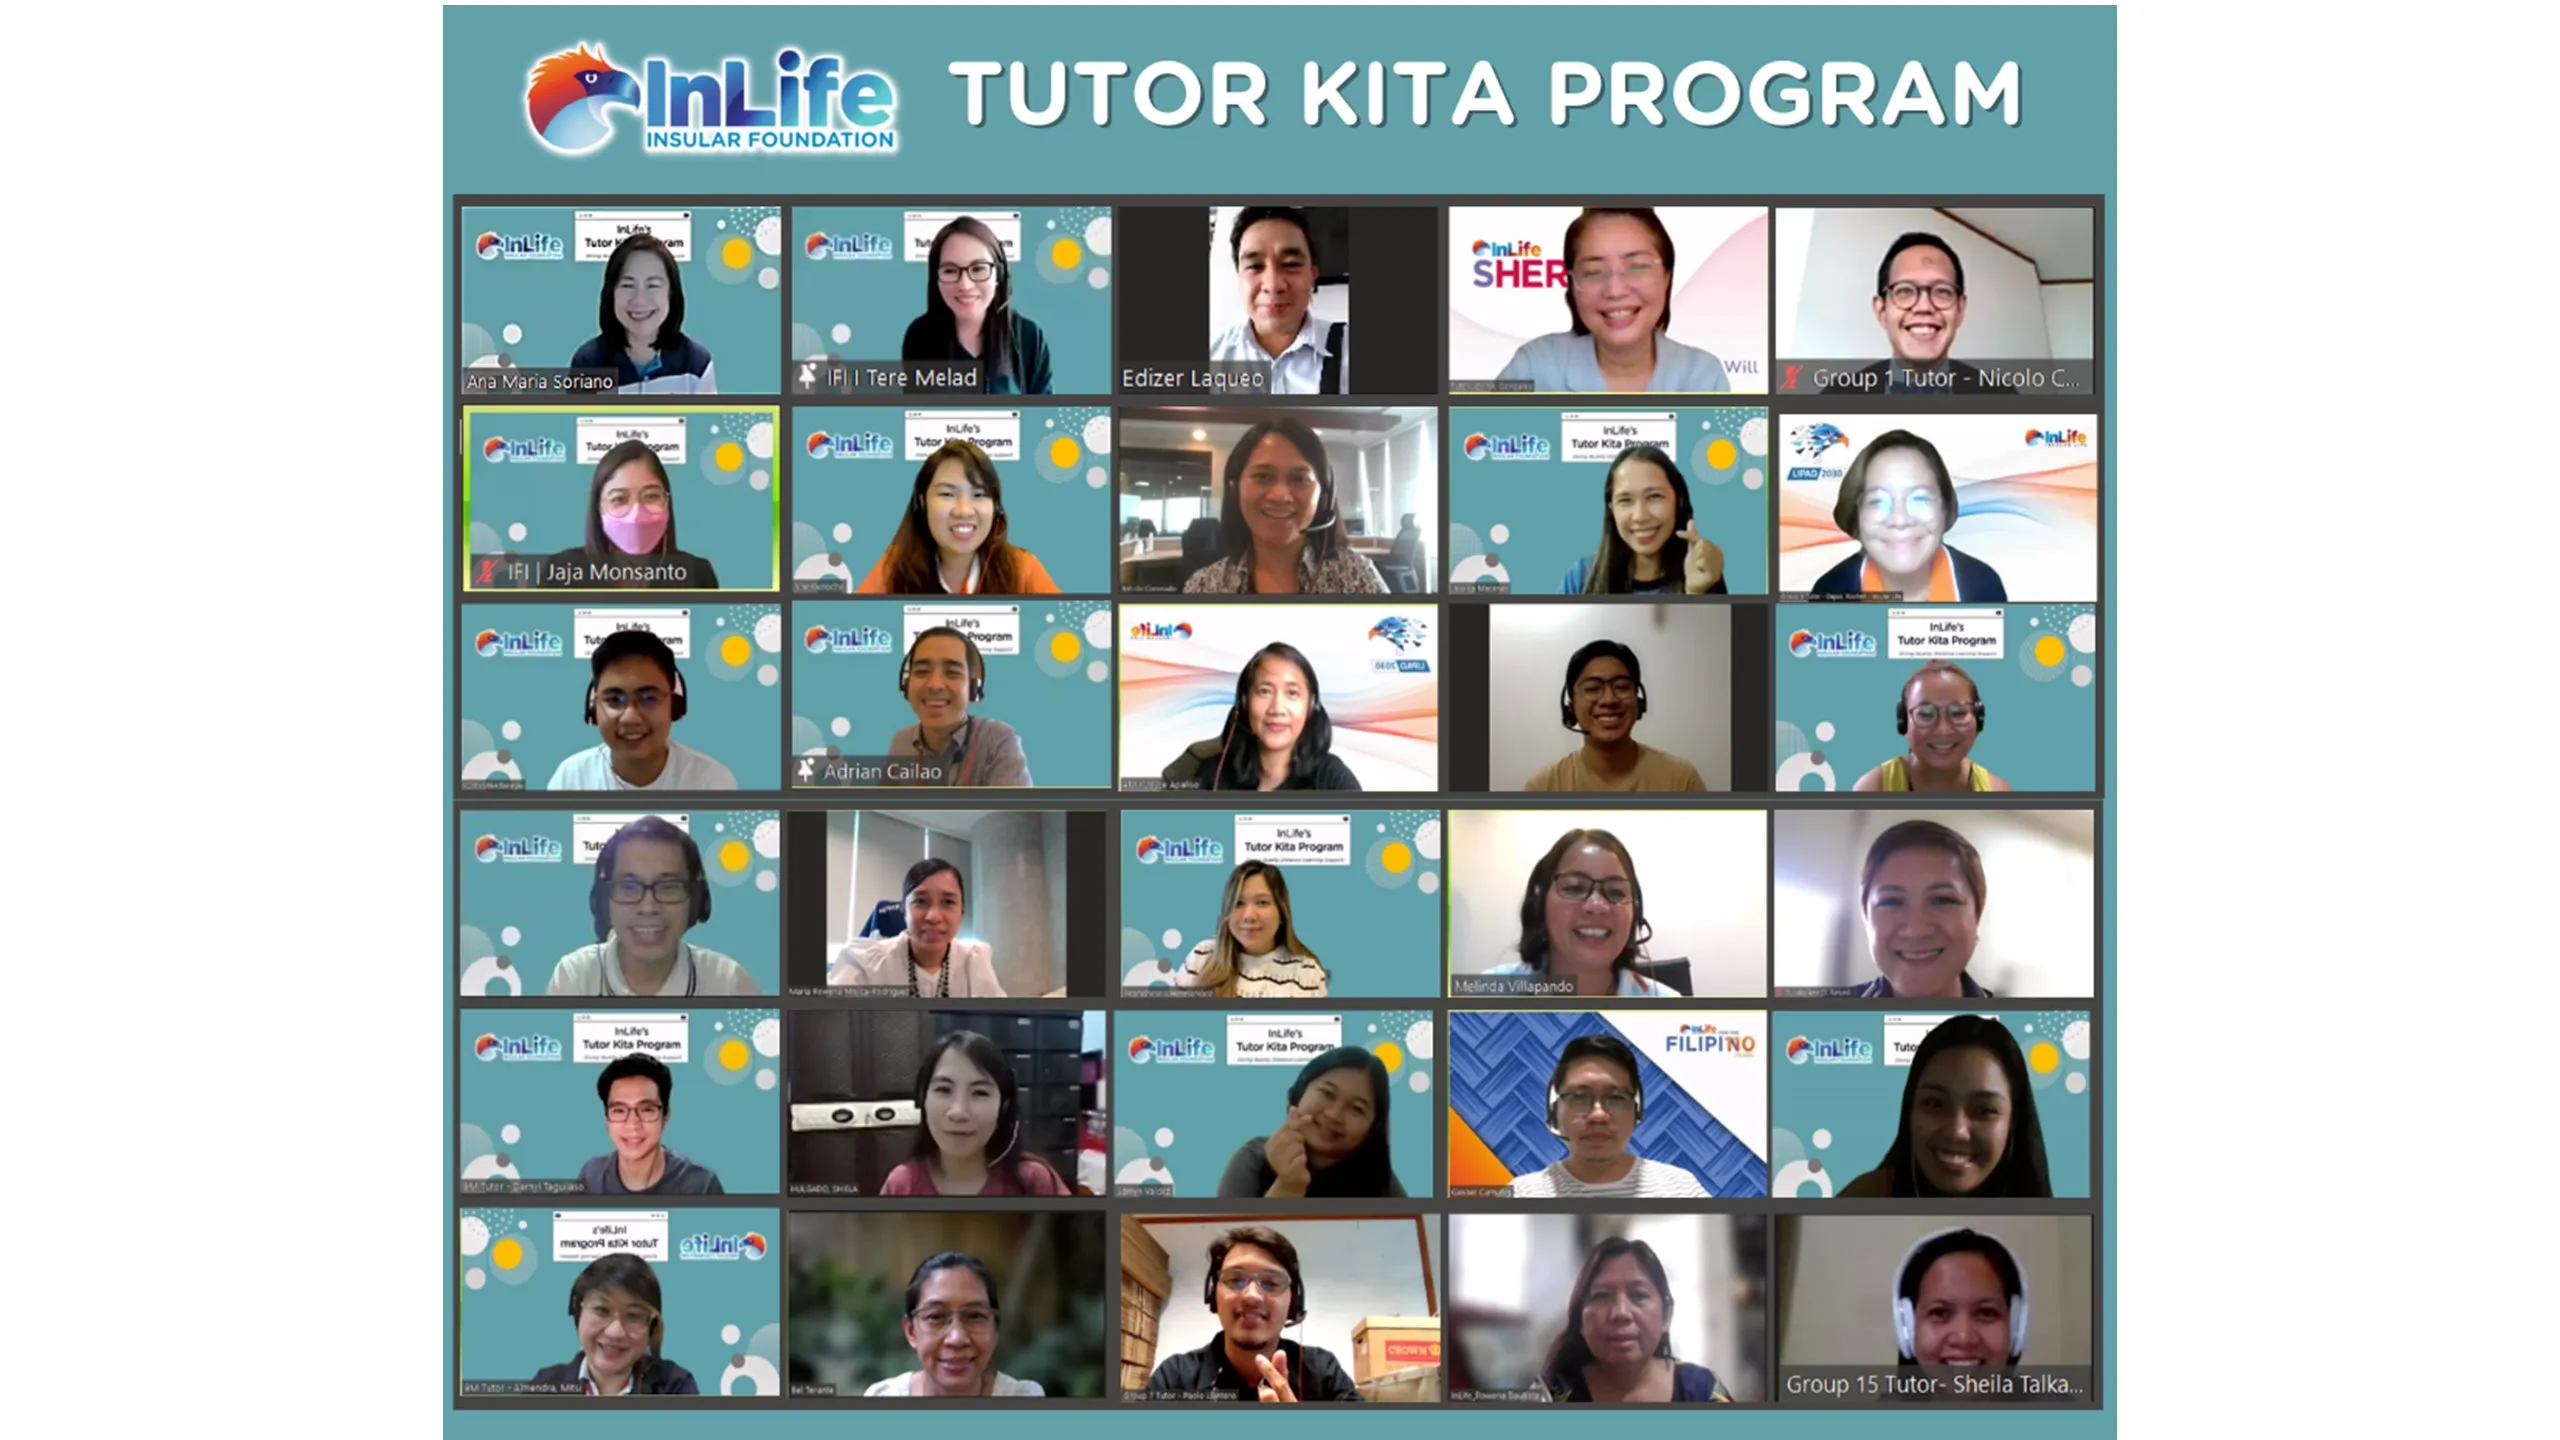 insular-foundation-s-tutor-kita-program-proves-learning-knows-no-bounds